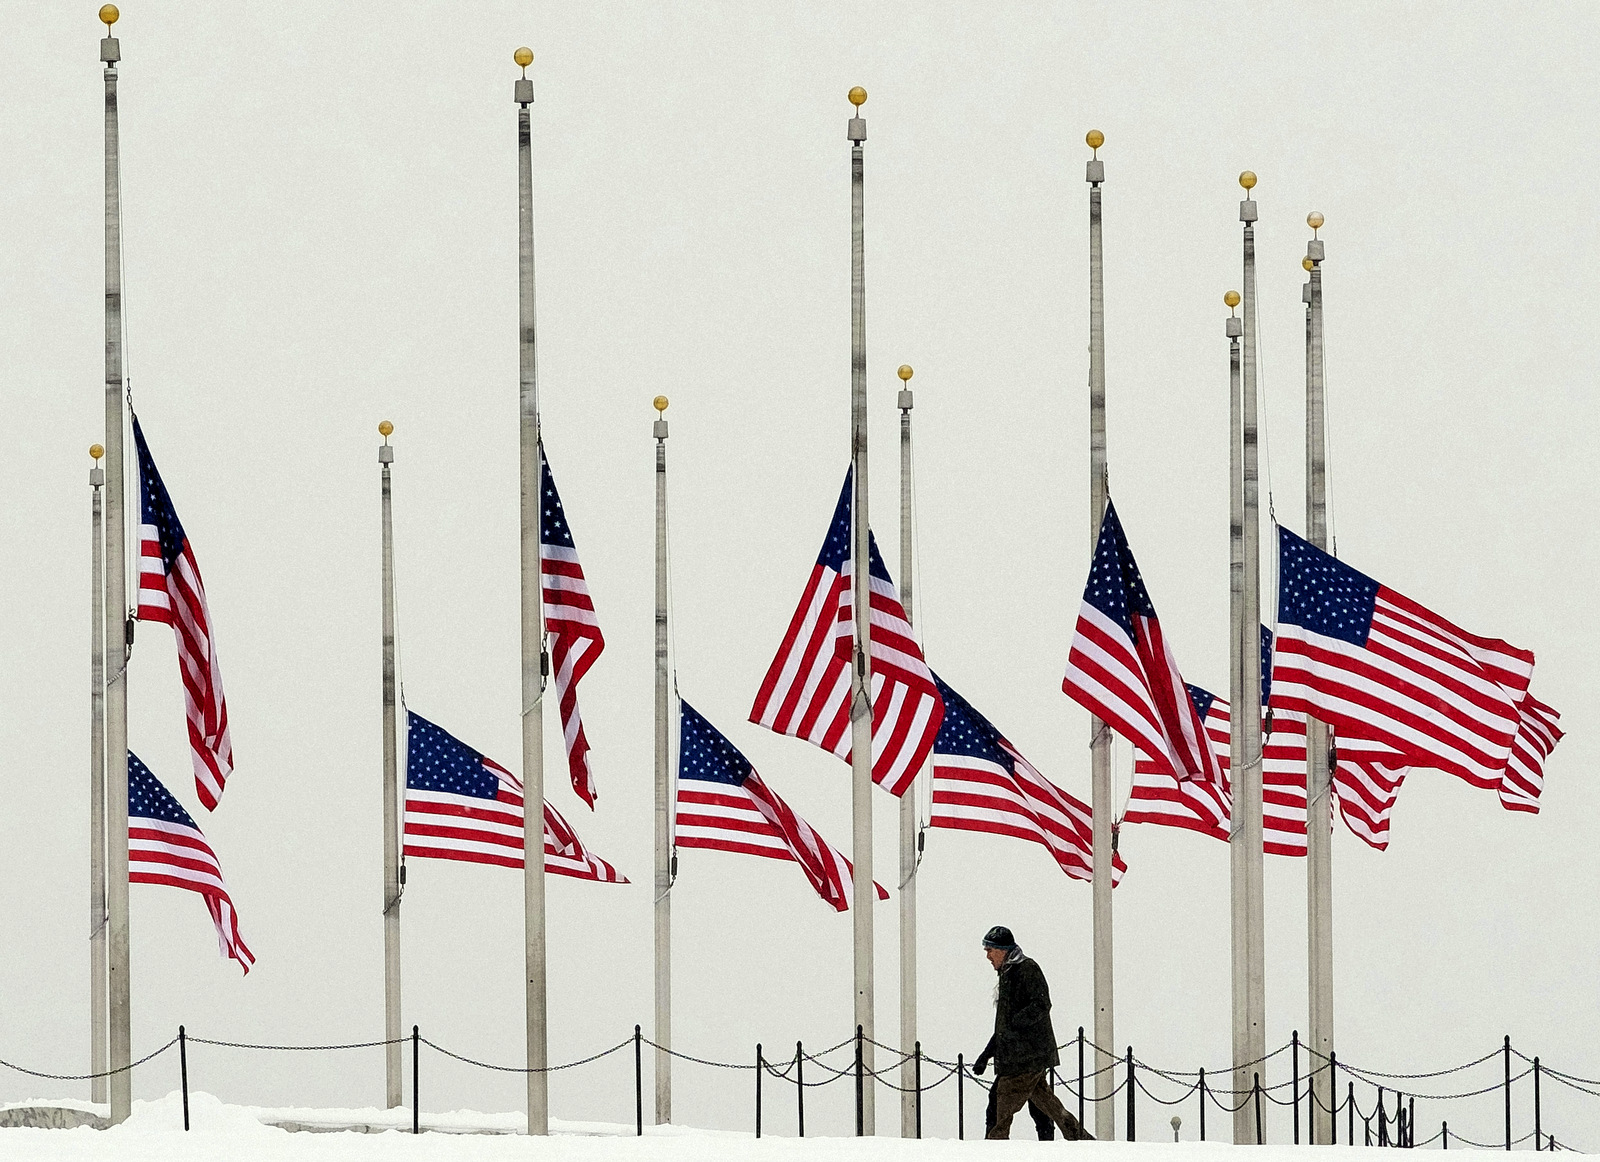 A vistor to the Washington Monument walks past flags flying a half-staff in honor of Supreme Court Justice Antonin Scalia on a wintry Presidents Day holiday in Washington, Monday, Feb, 15, 2016. (AP Photo/J. David Ake)